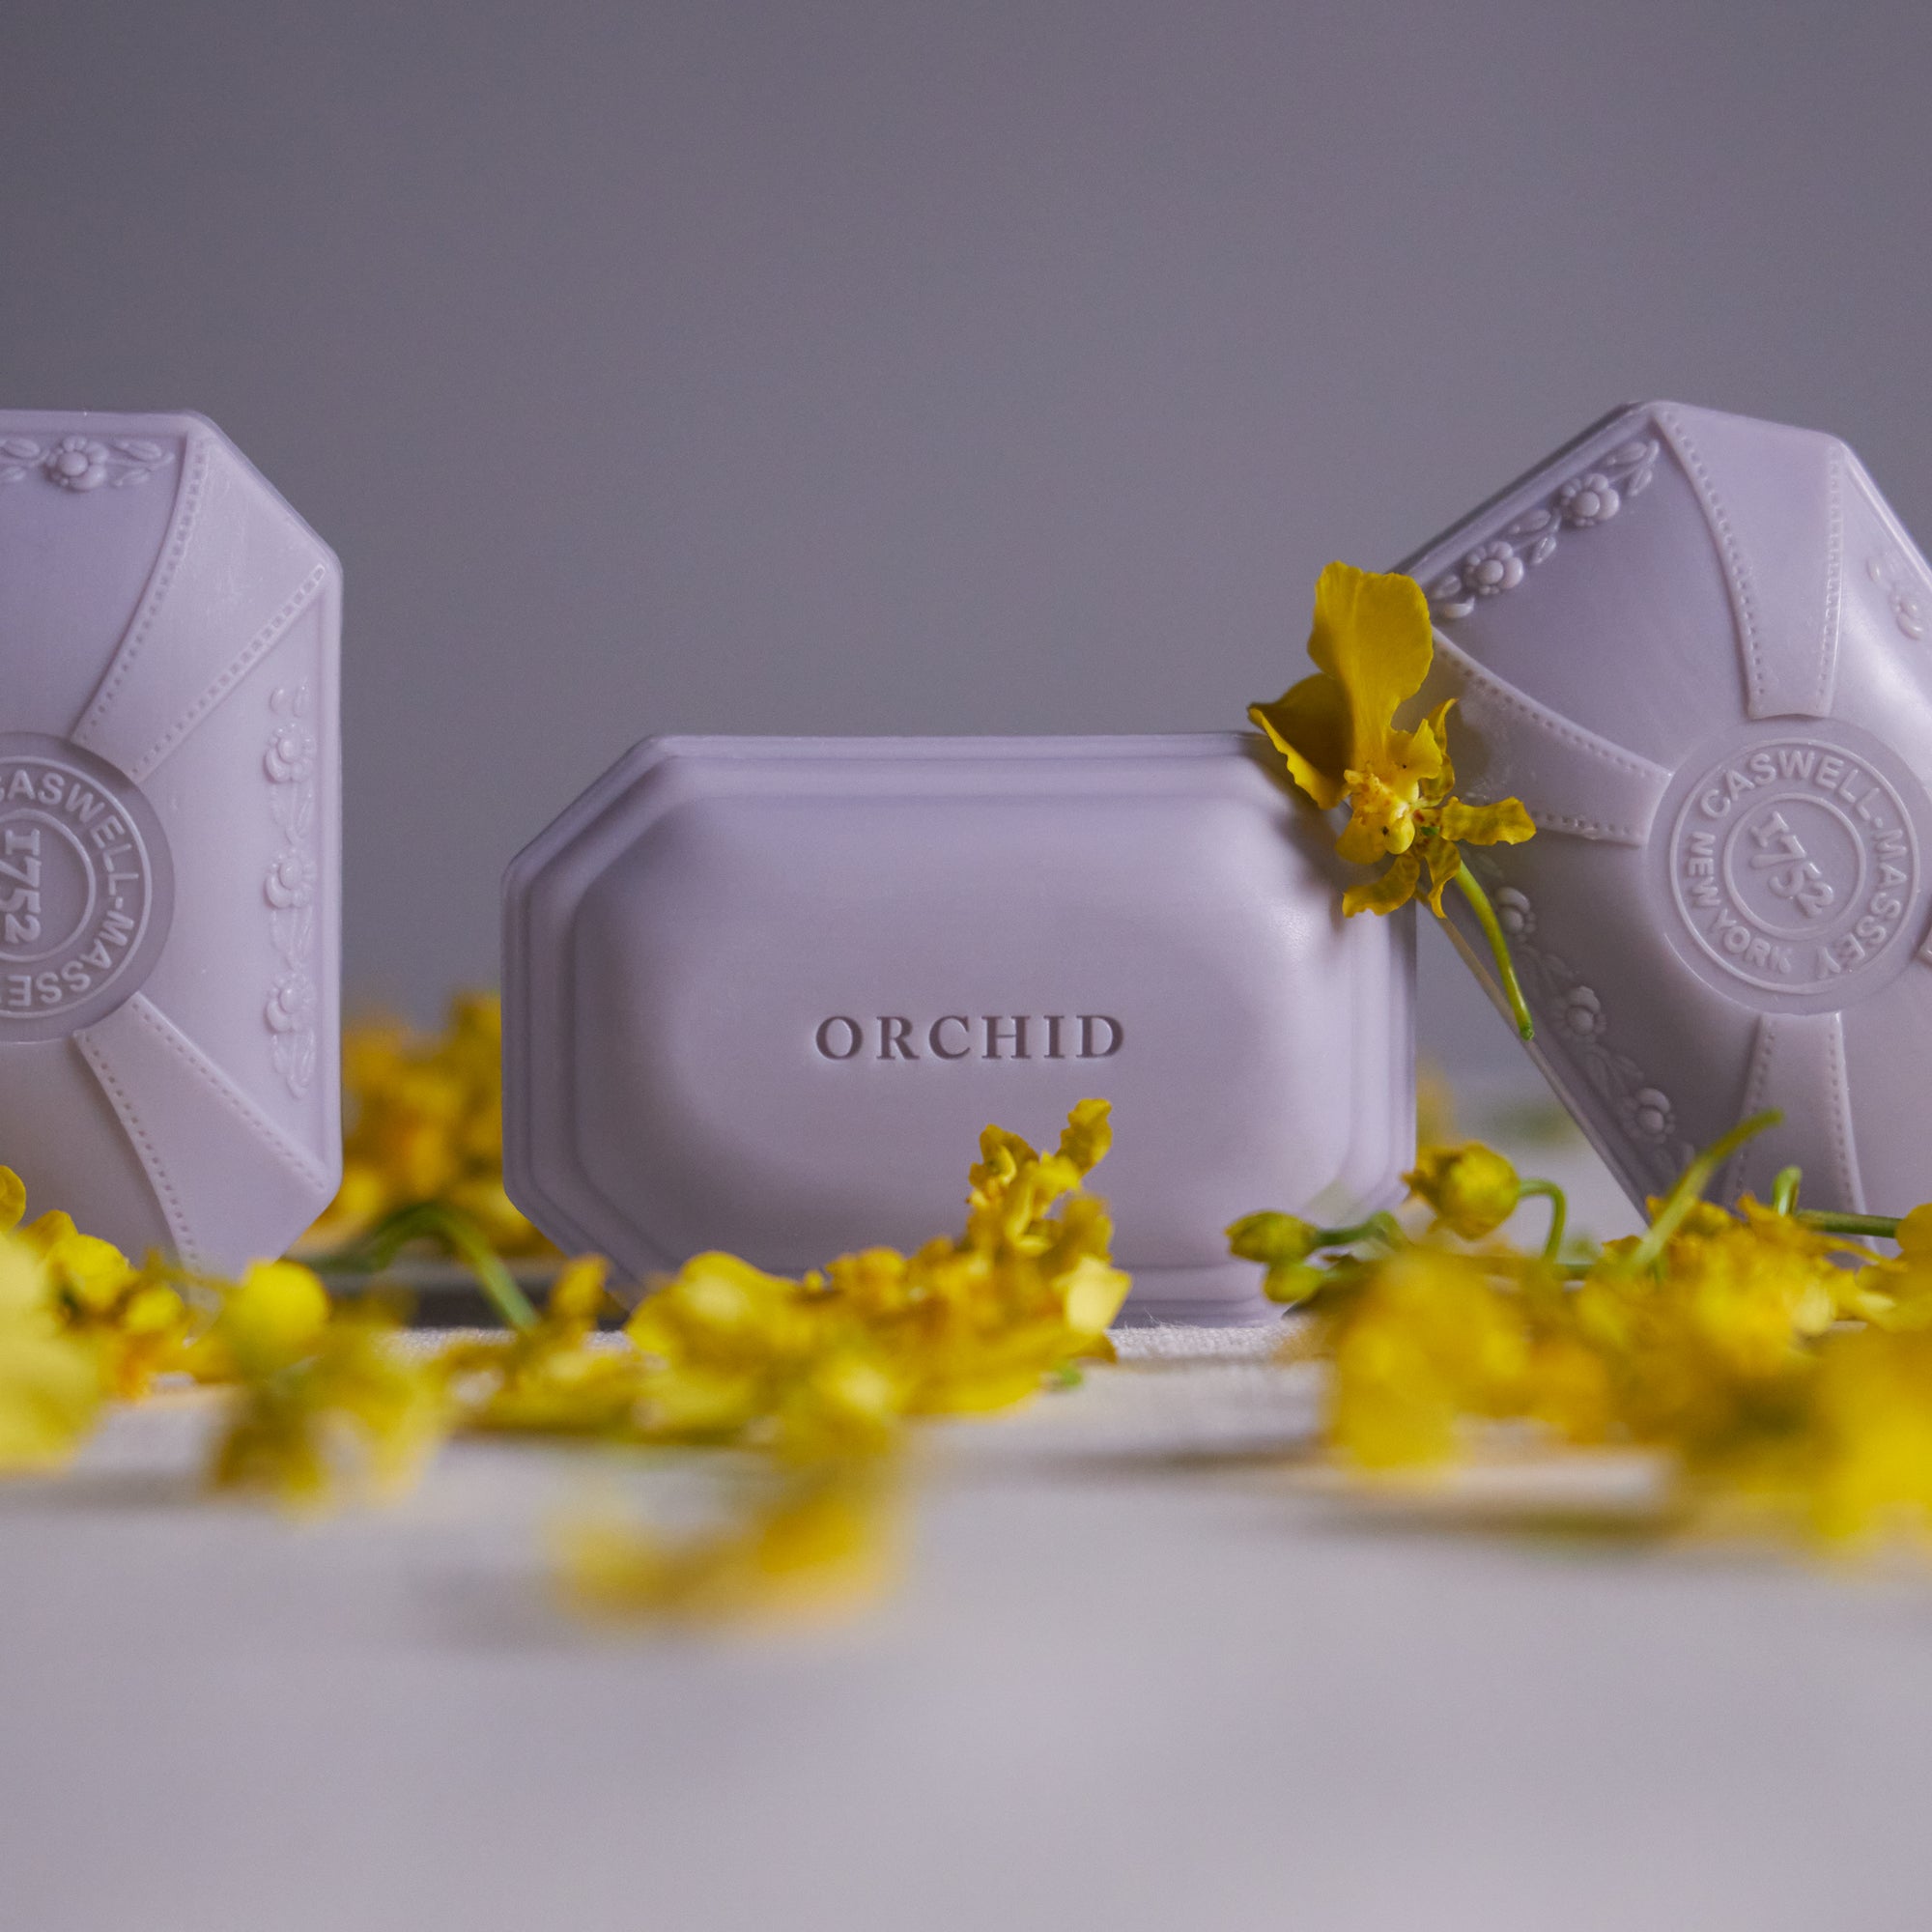 Caswell-Massey Orchid Bar Soap: Three bars of Orchid Soap in soft lavender color shown with orchid petals and flowers